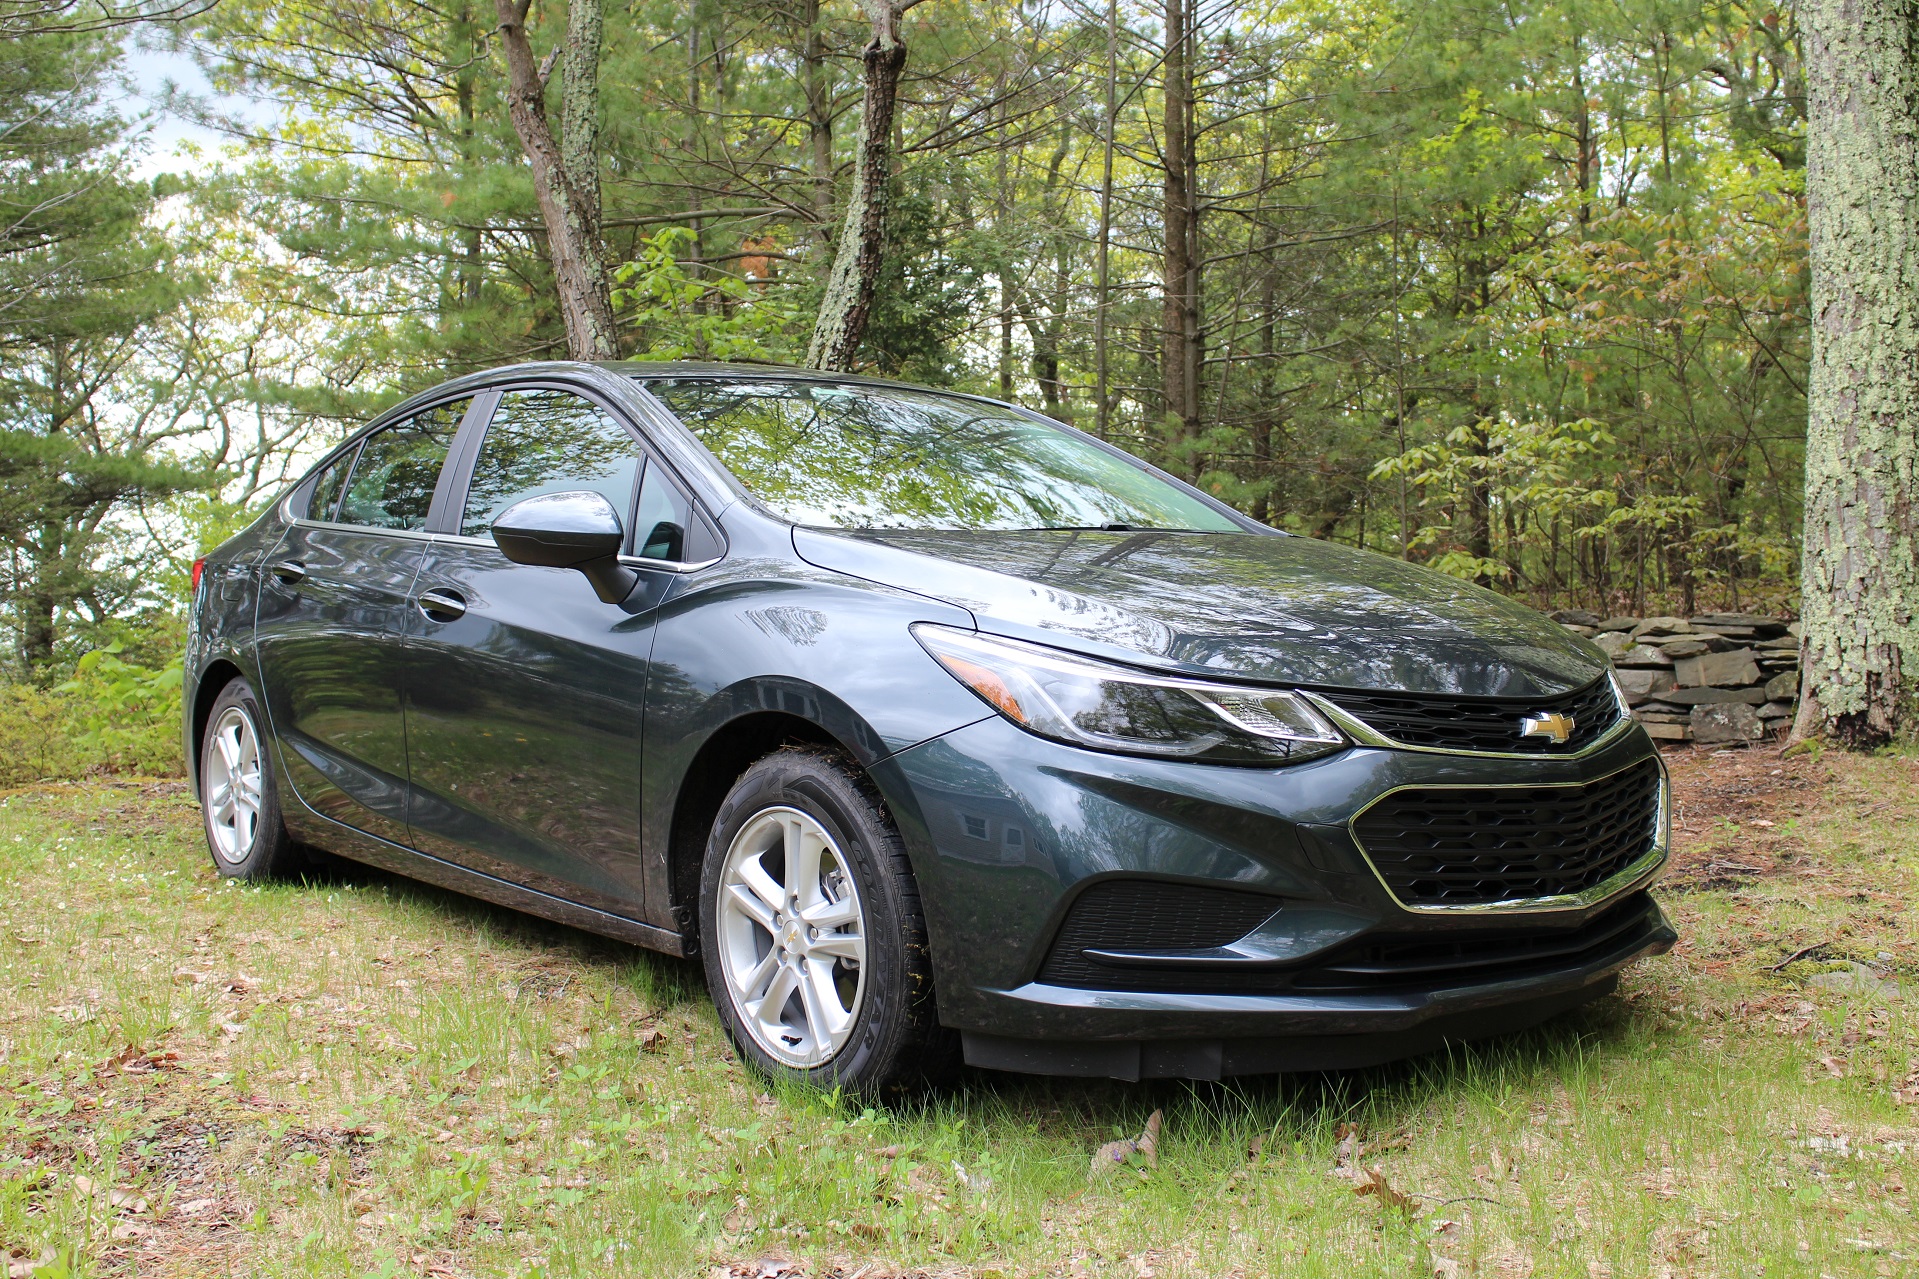 2017 Chevrolet Cruze Diesel fuel economy review for